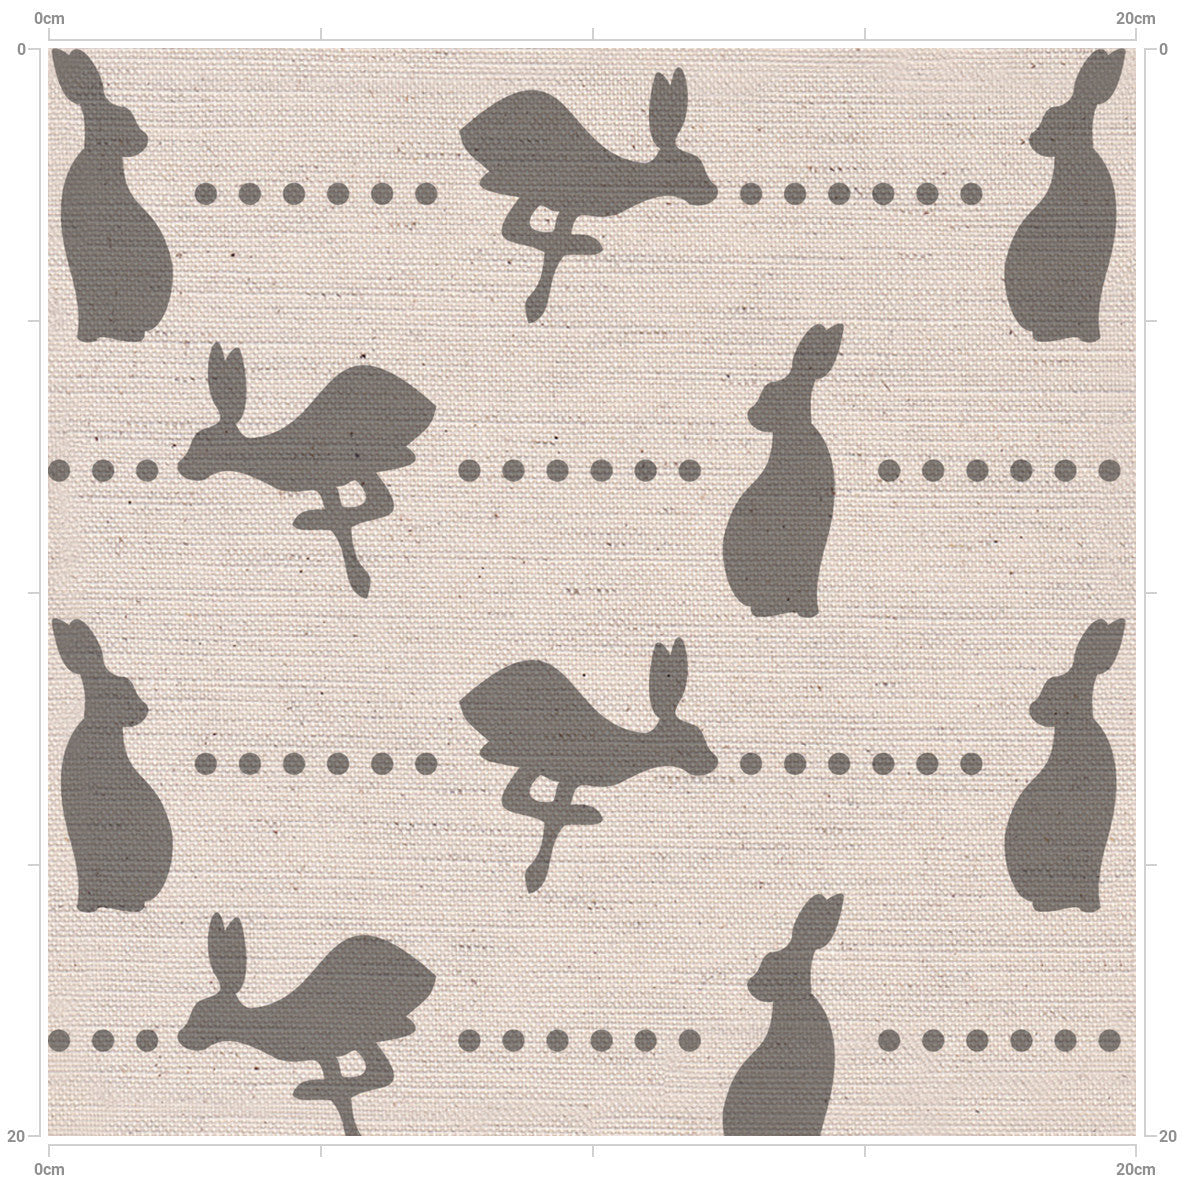 Country Home Country Living - Slate Grey Nursery and Home Decor Linen Fabric designed by F&B